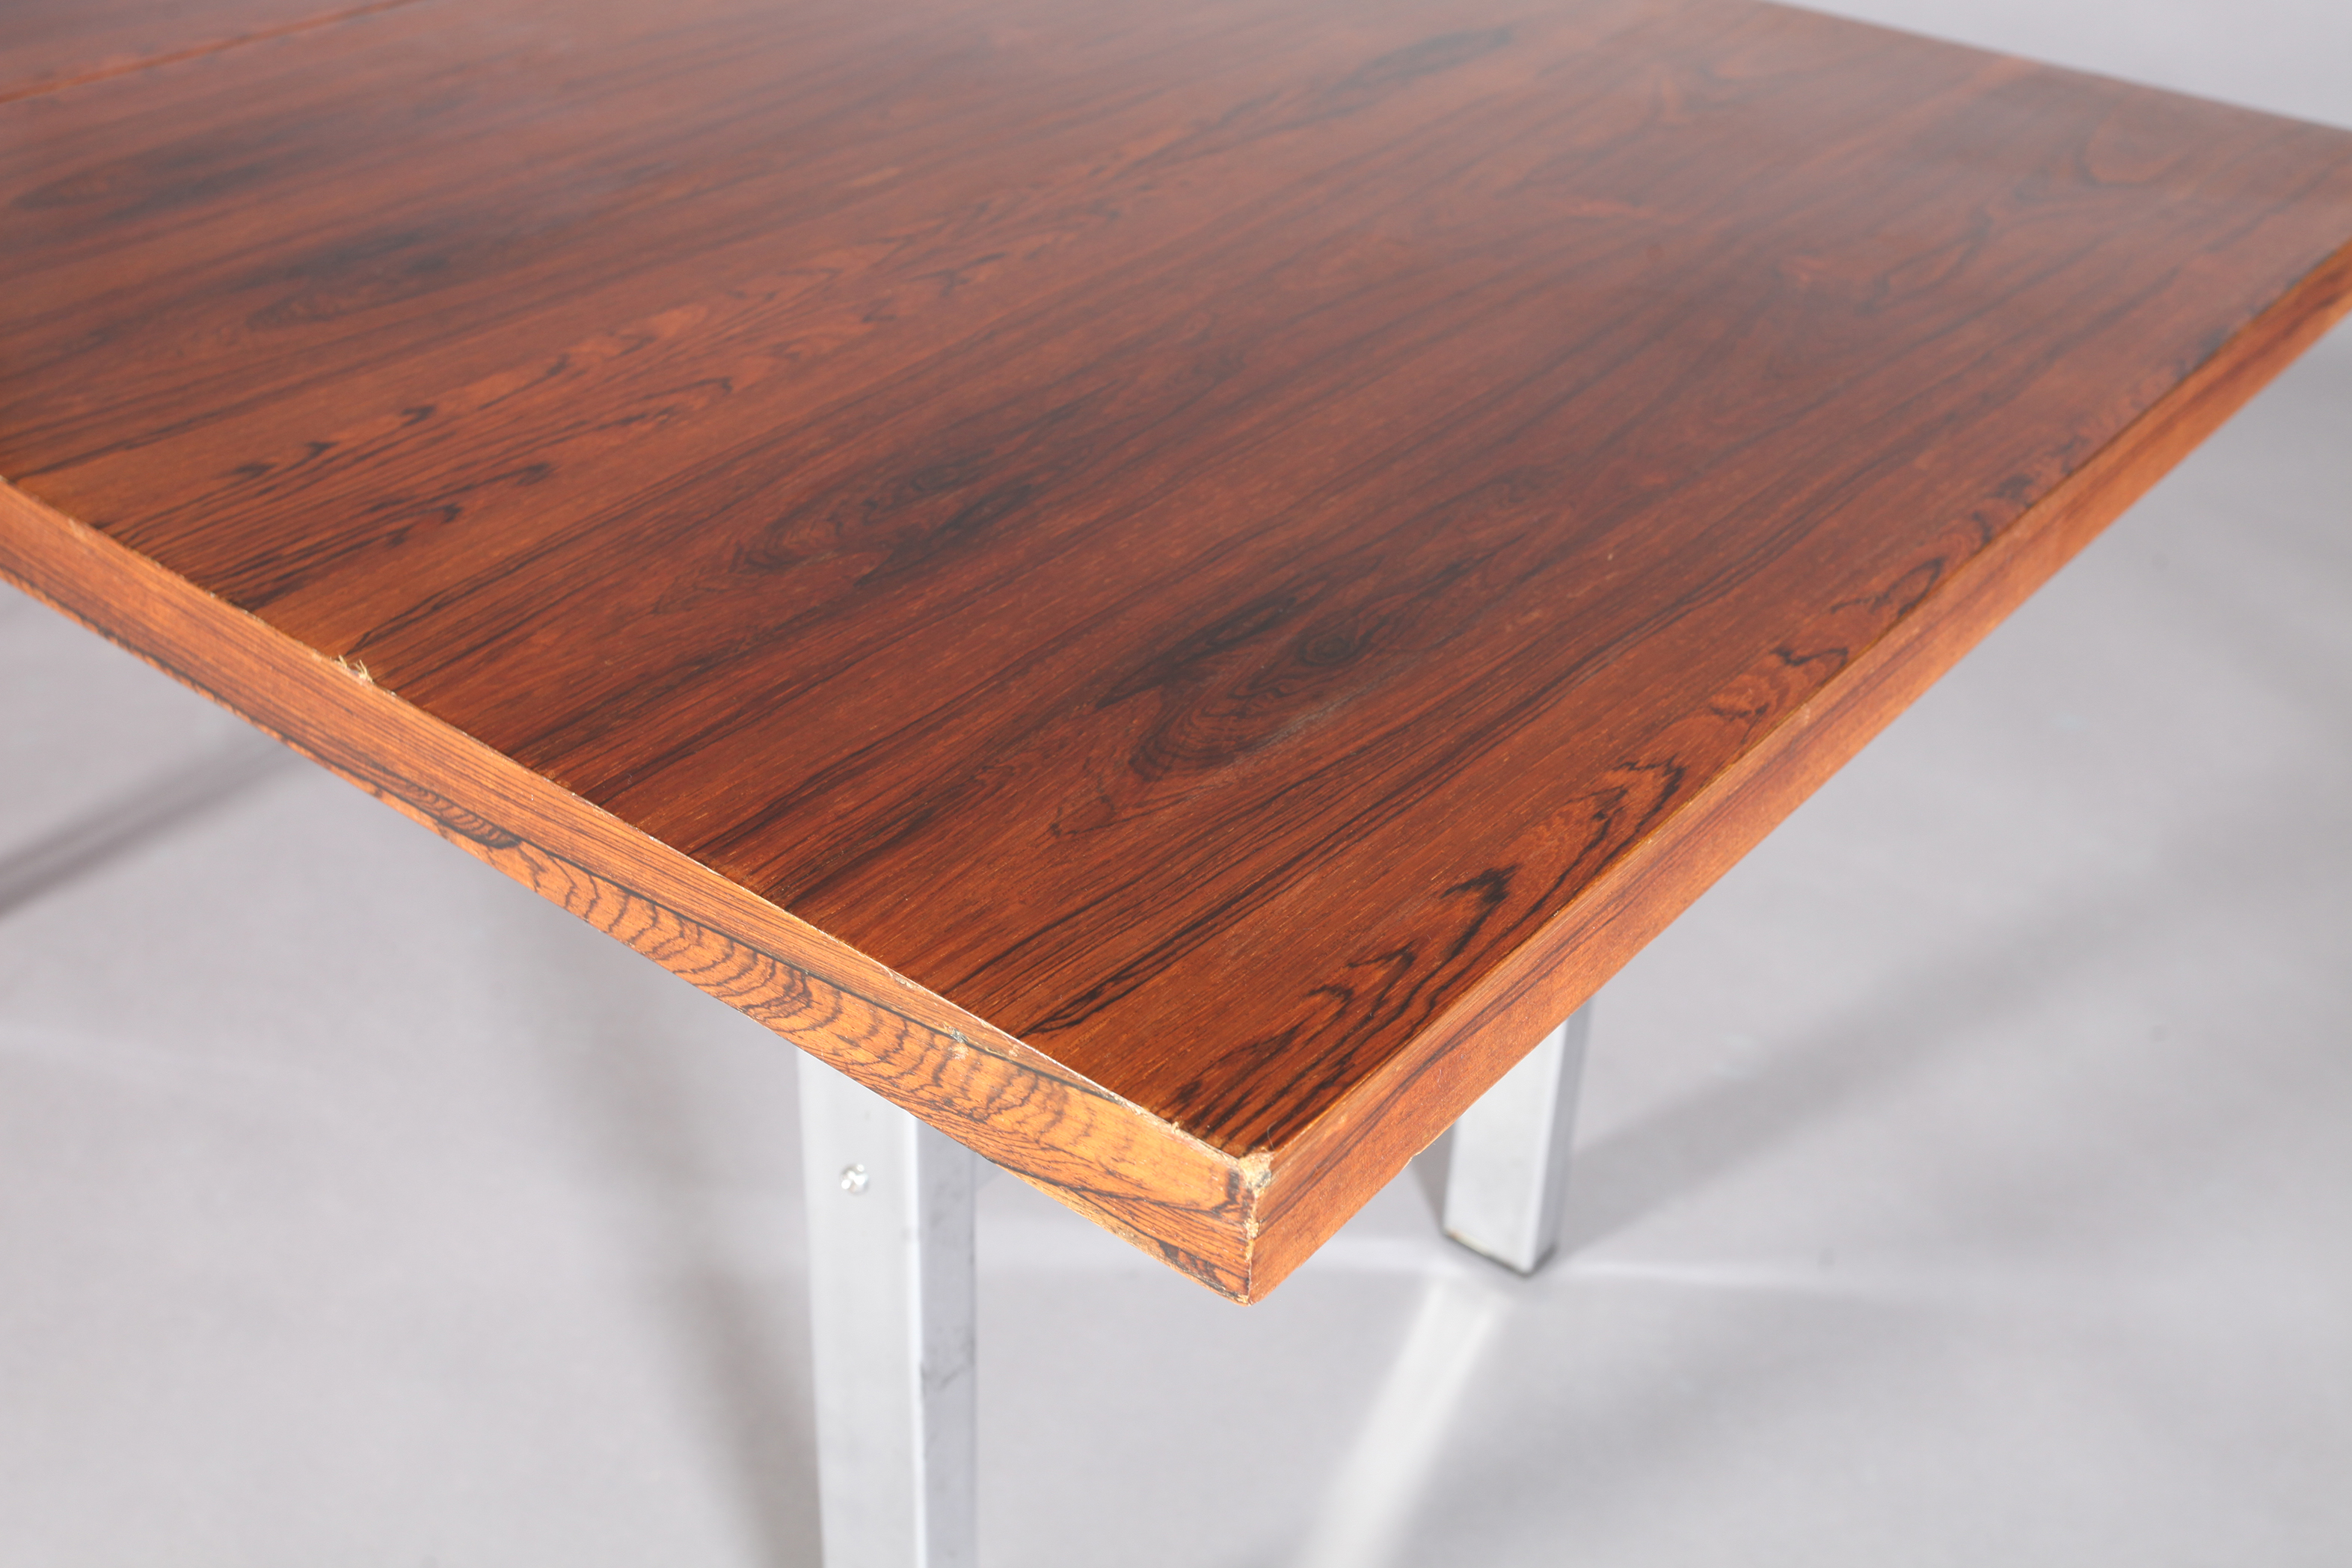 MERROW ASSOCIATES, BRITAIN, c.1970s, a rosewood extending dining table, rectangular, on refectory - Image 4 of 6